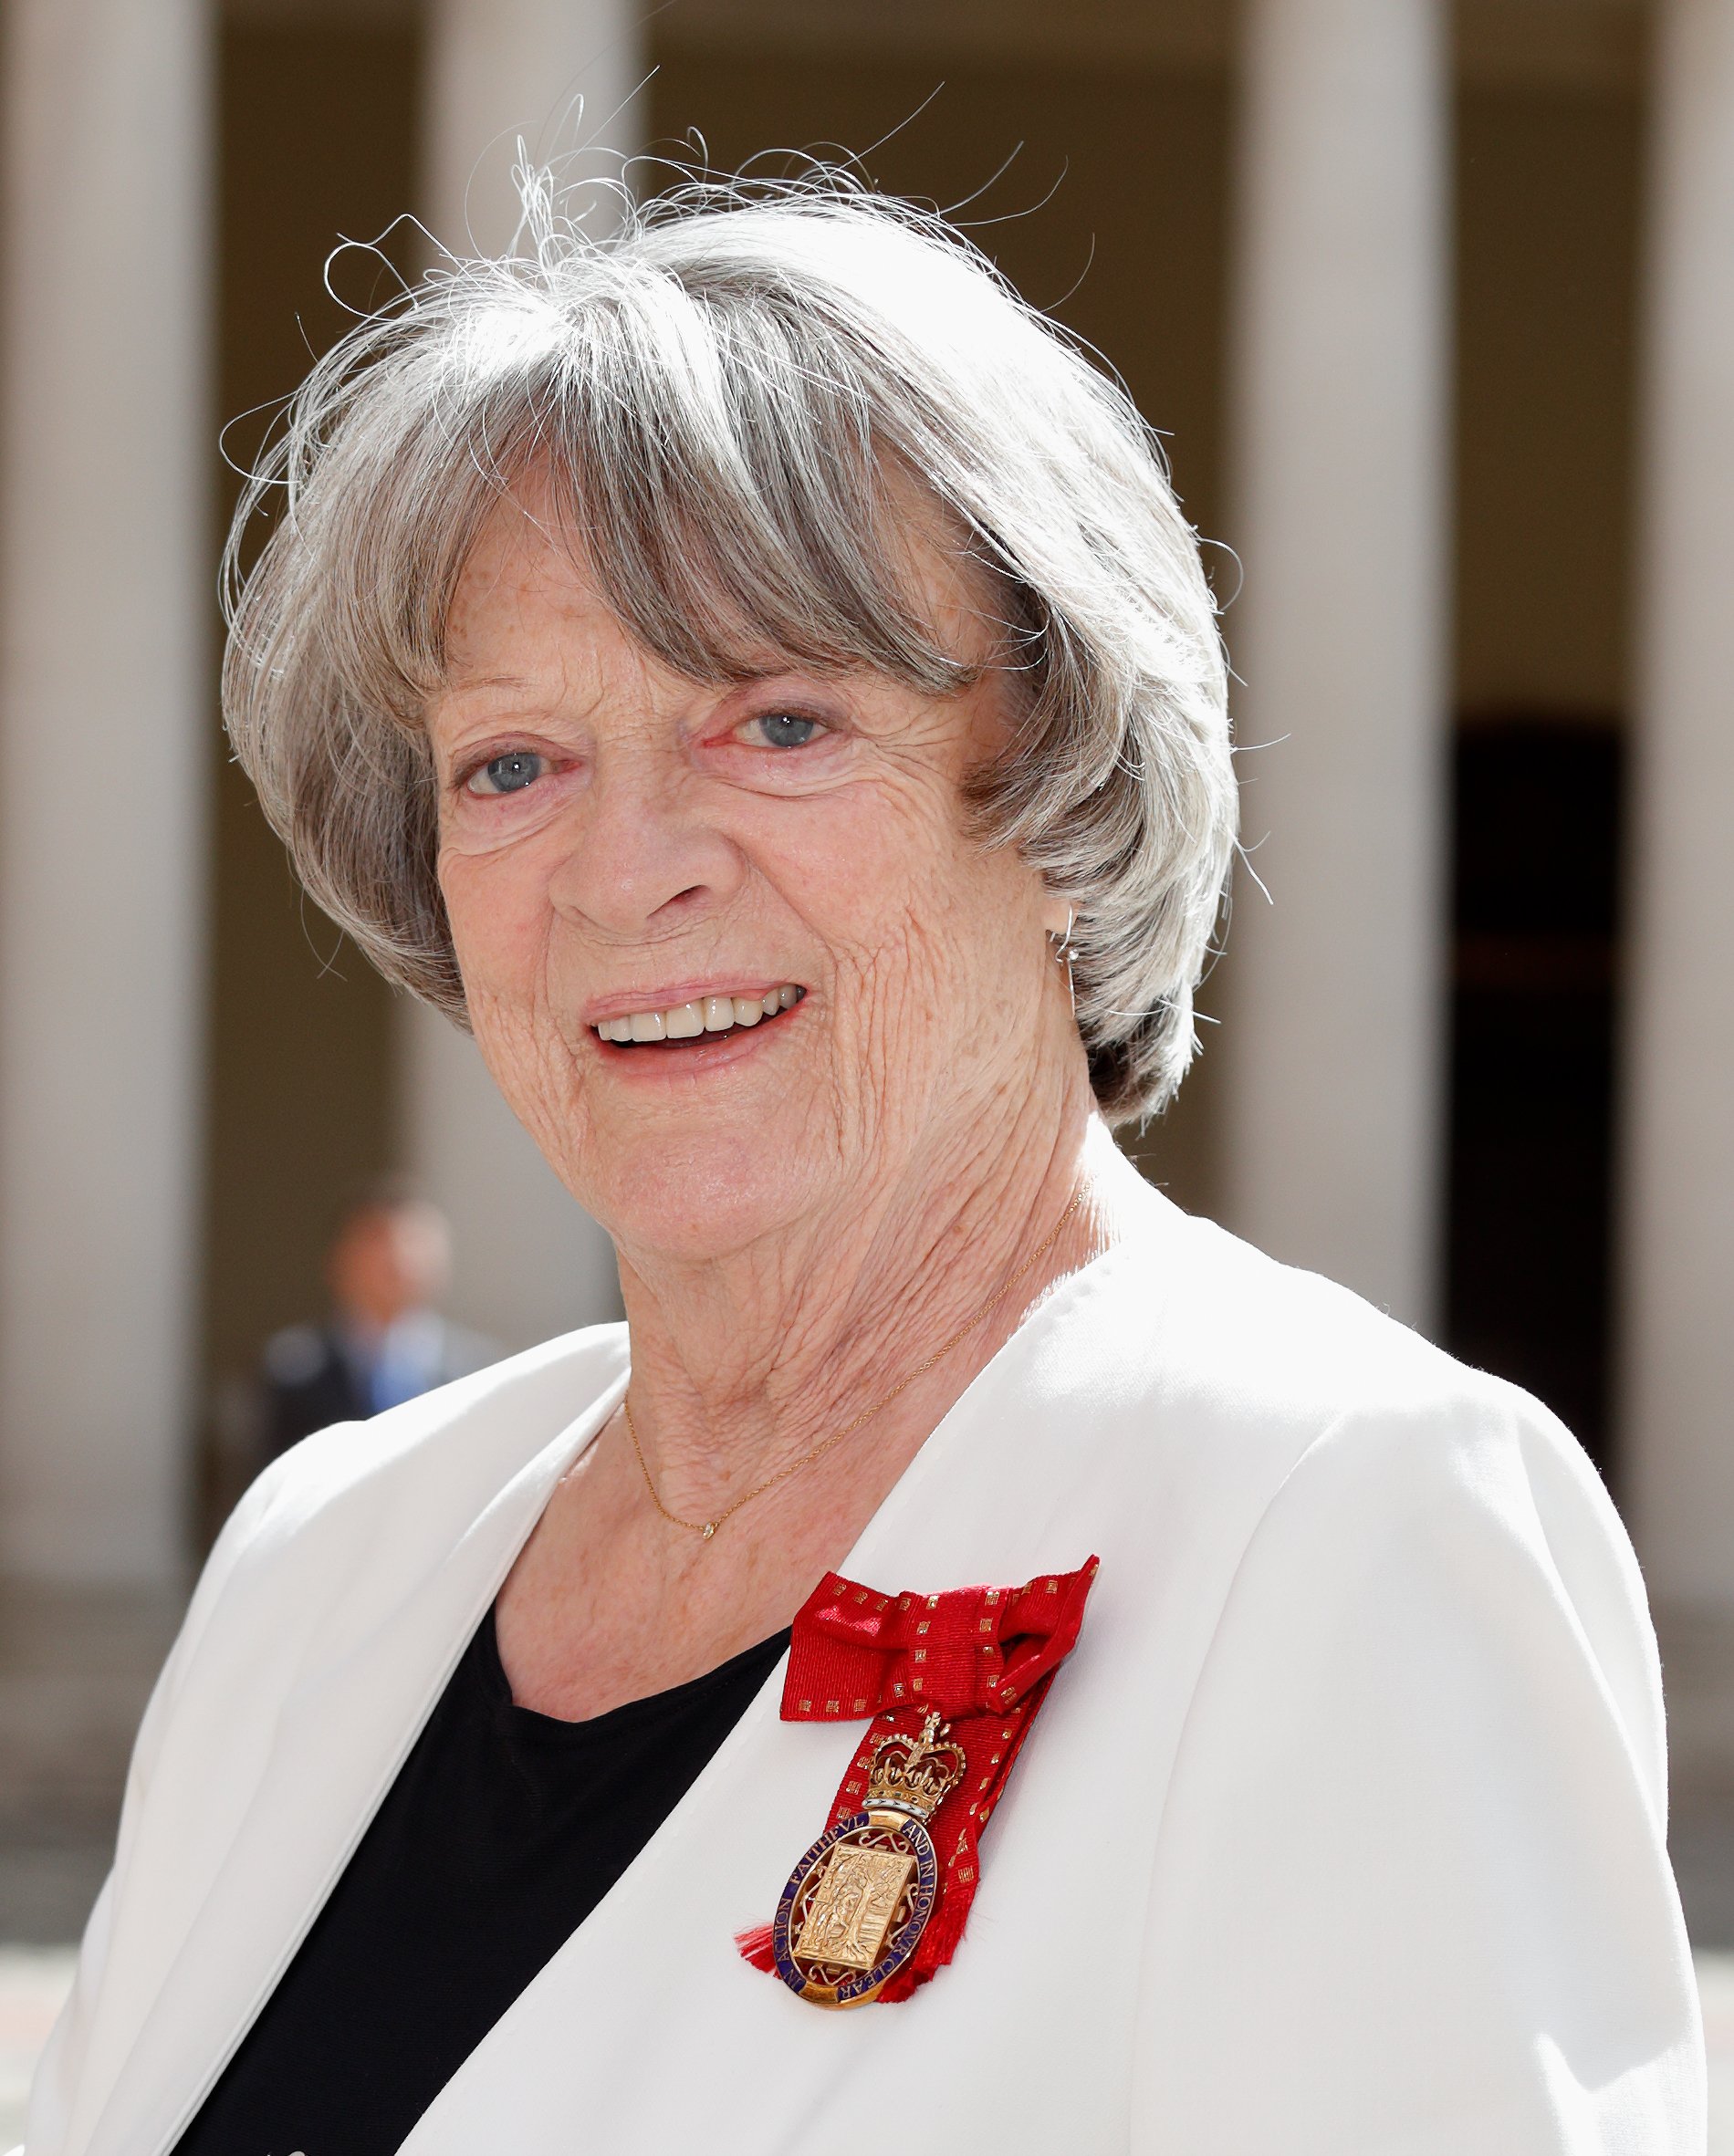 Dame Maggie Smith arrives at Evensong at the Chapel Royal Hampton Court Palace, to celebrate the Centenary of the founding of the Companions of Honour on June 13, 2017 in London, England. | Source: Getty Images